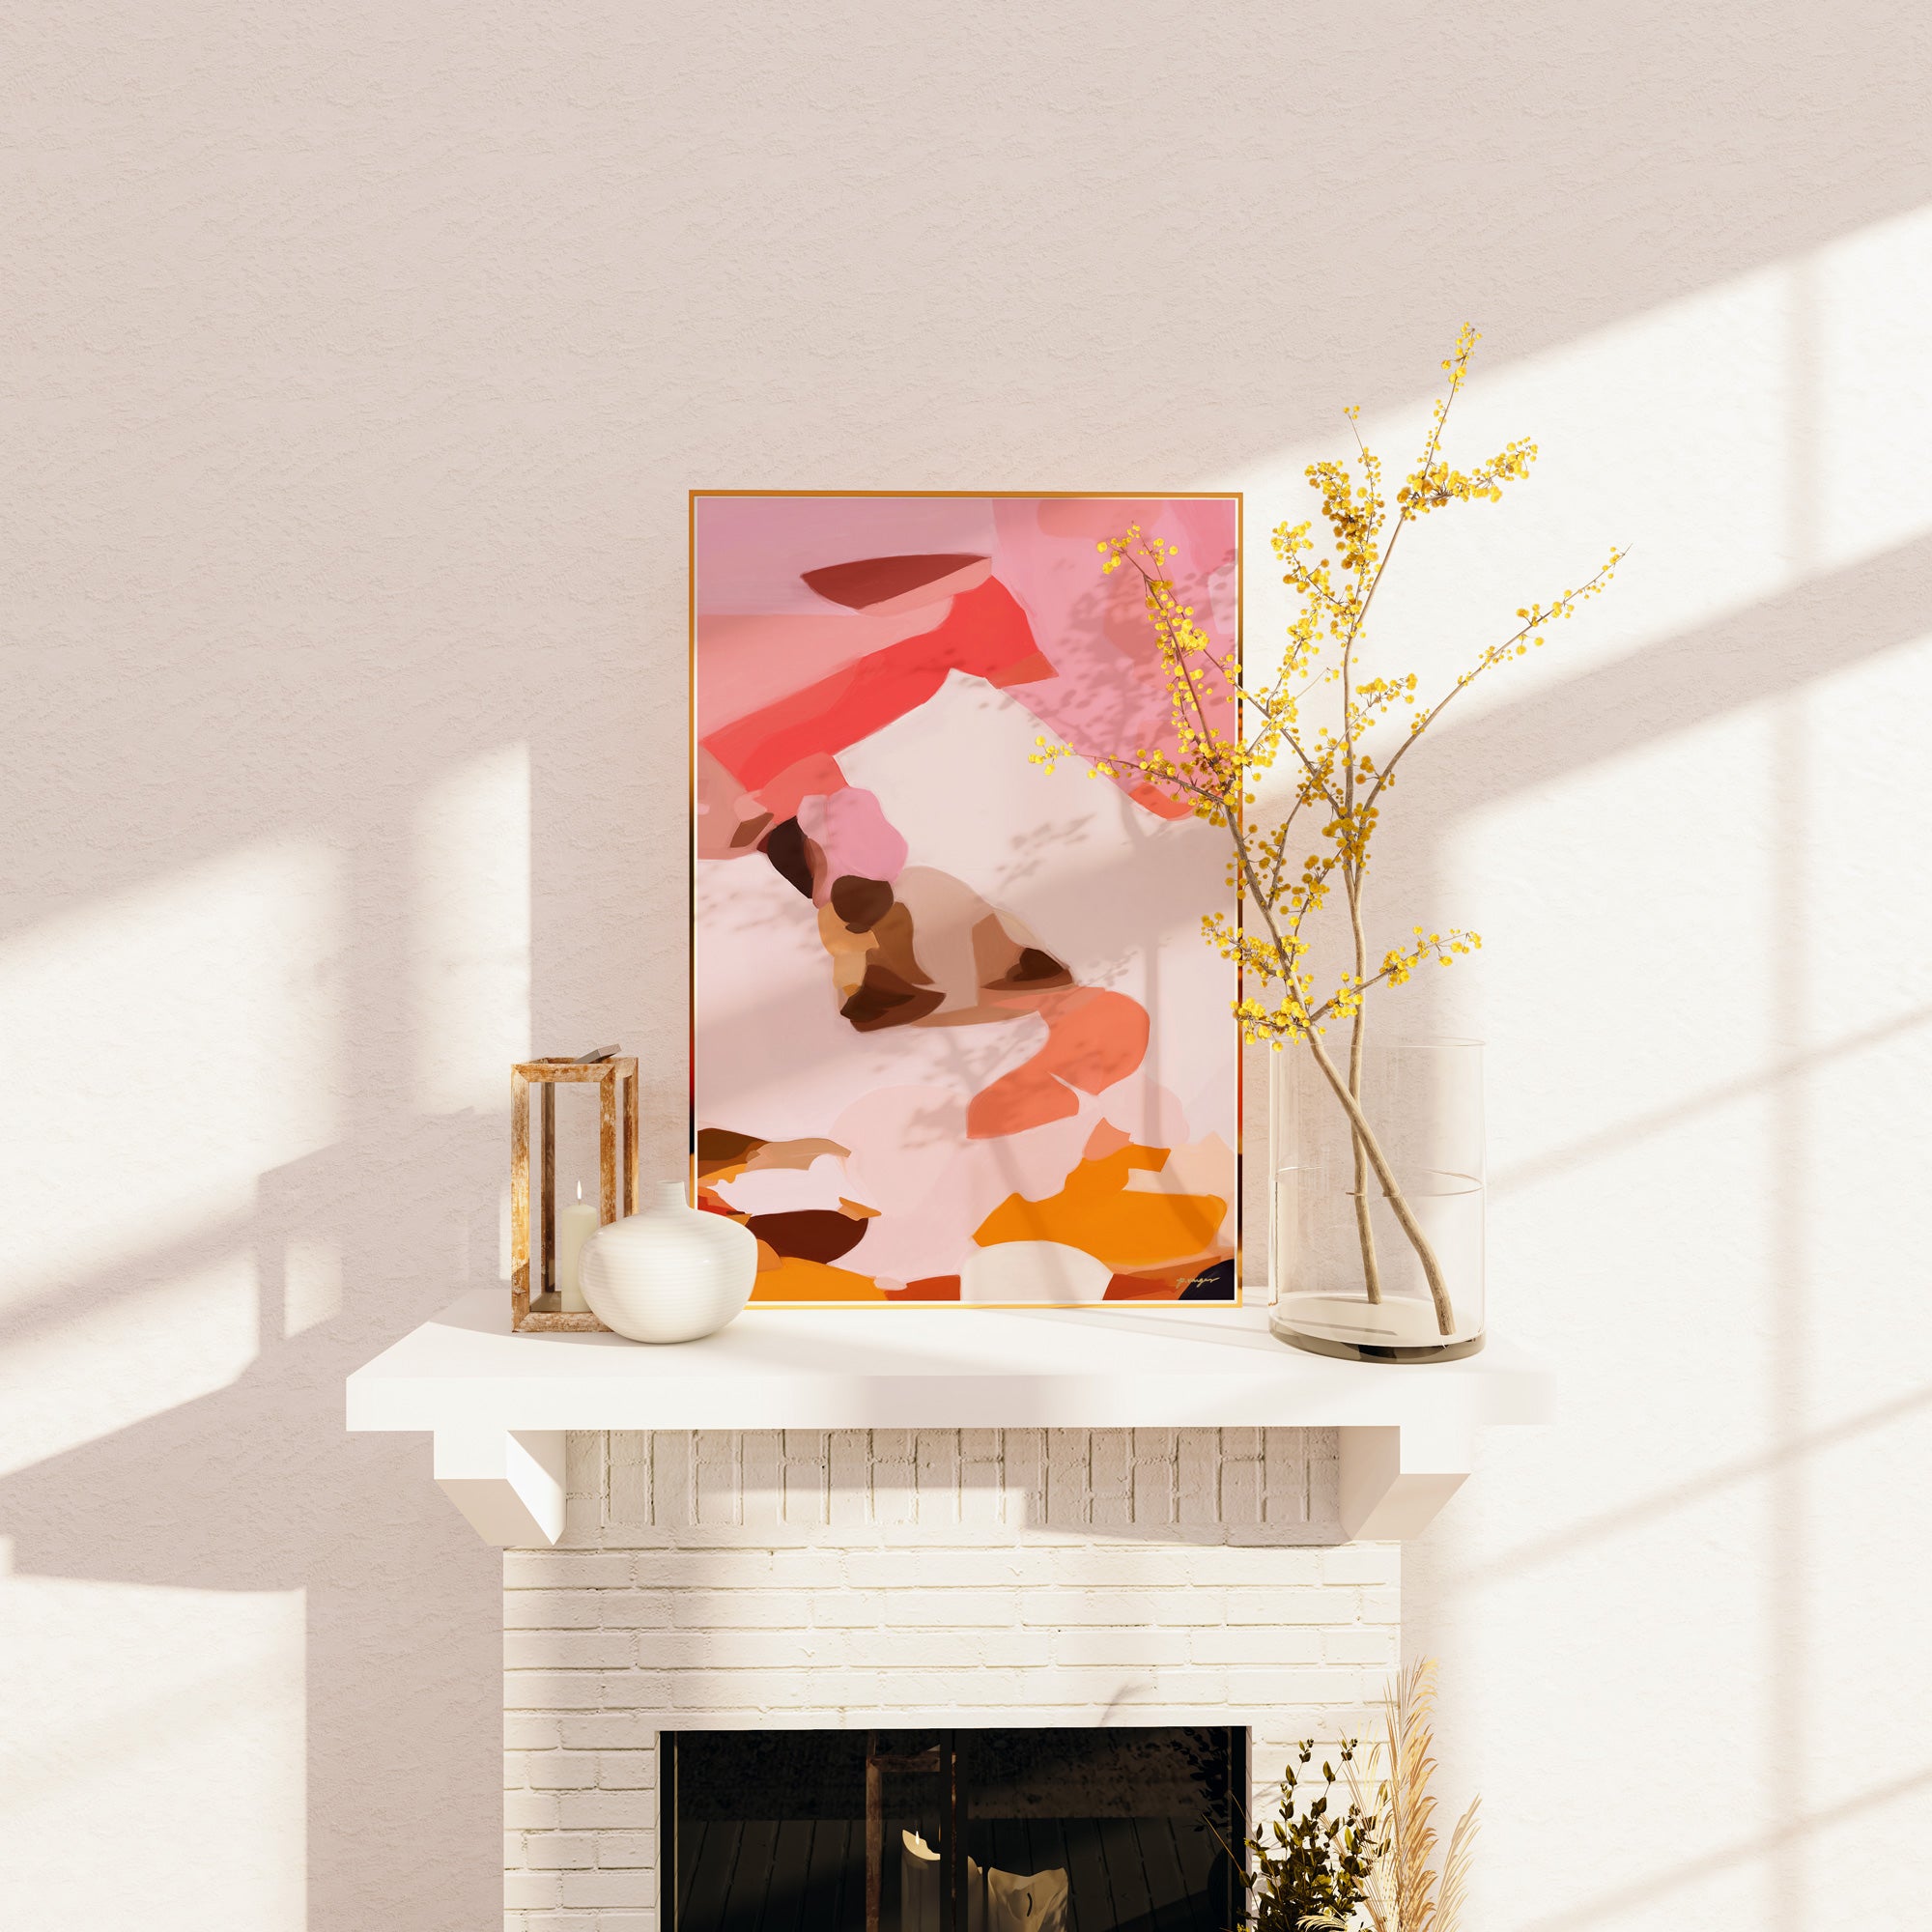 Aby, pink and orange abstract wall art print - contemporary art over fireplace - minimalist - Parima Studio